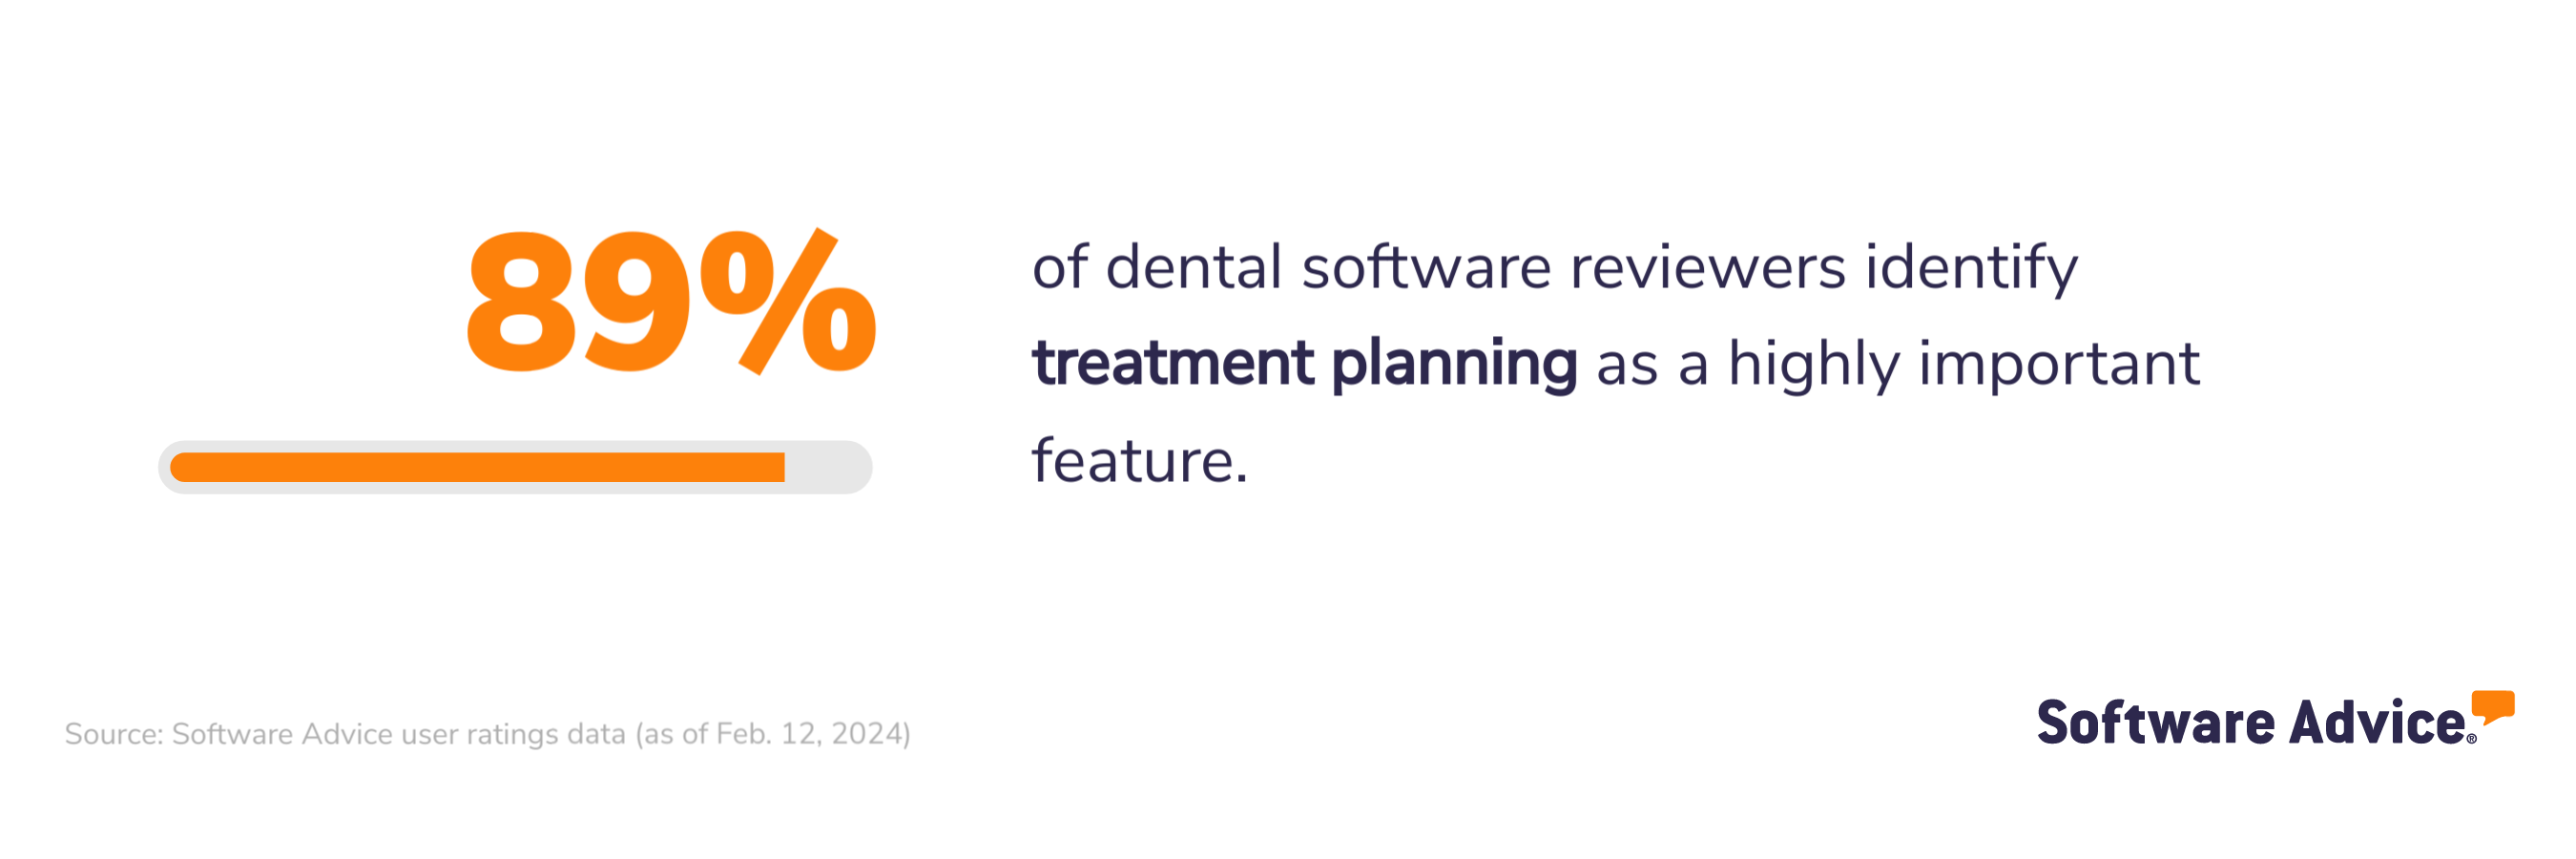 89% of dental software reviewers identify treatment planning as a highly important feature